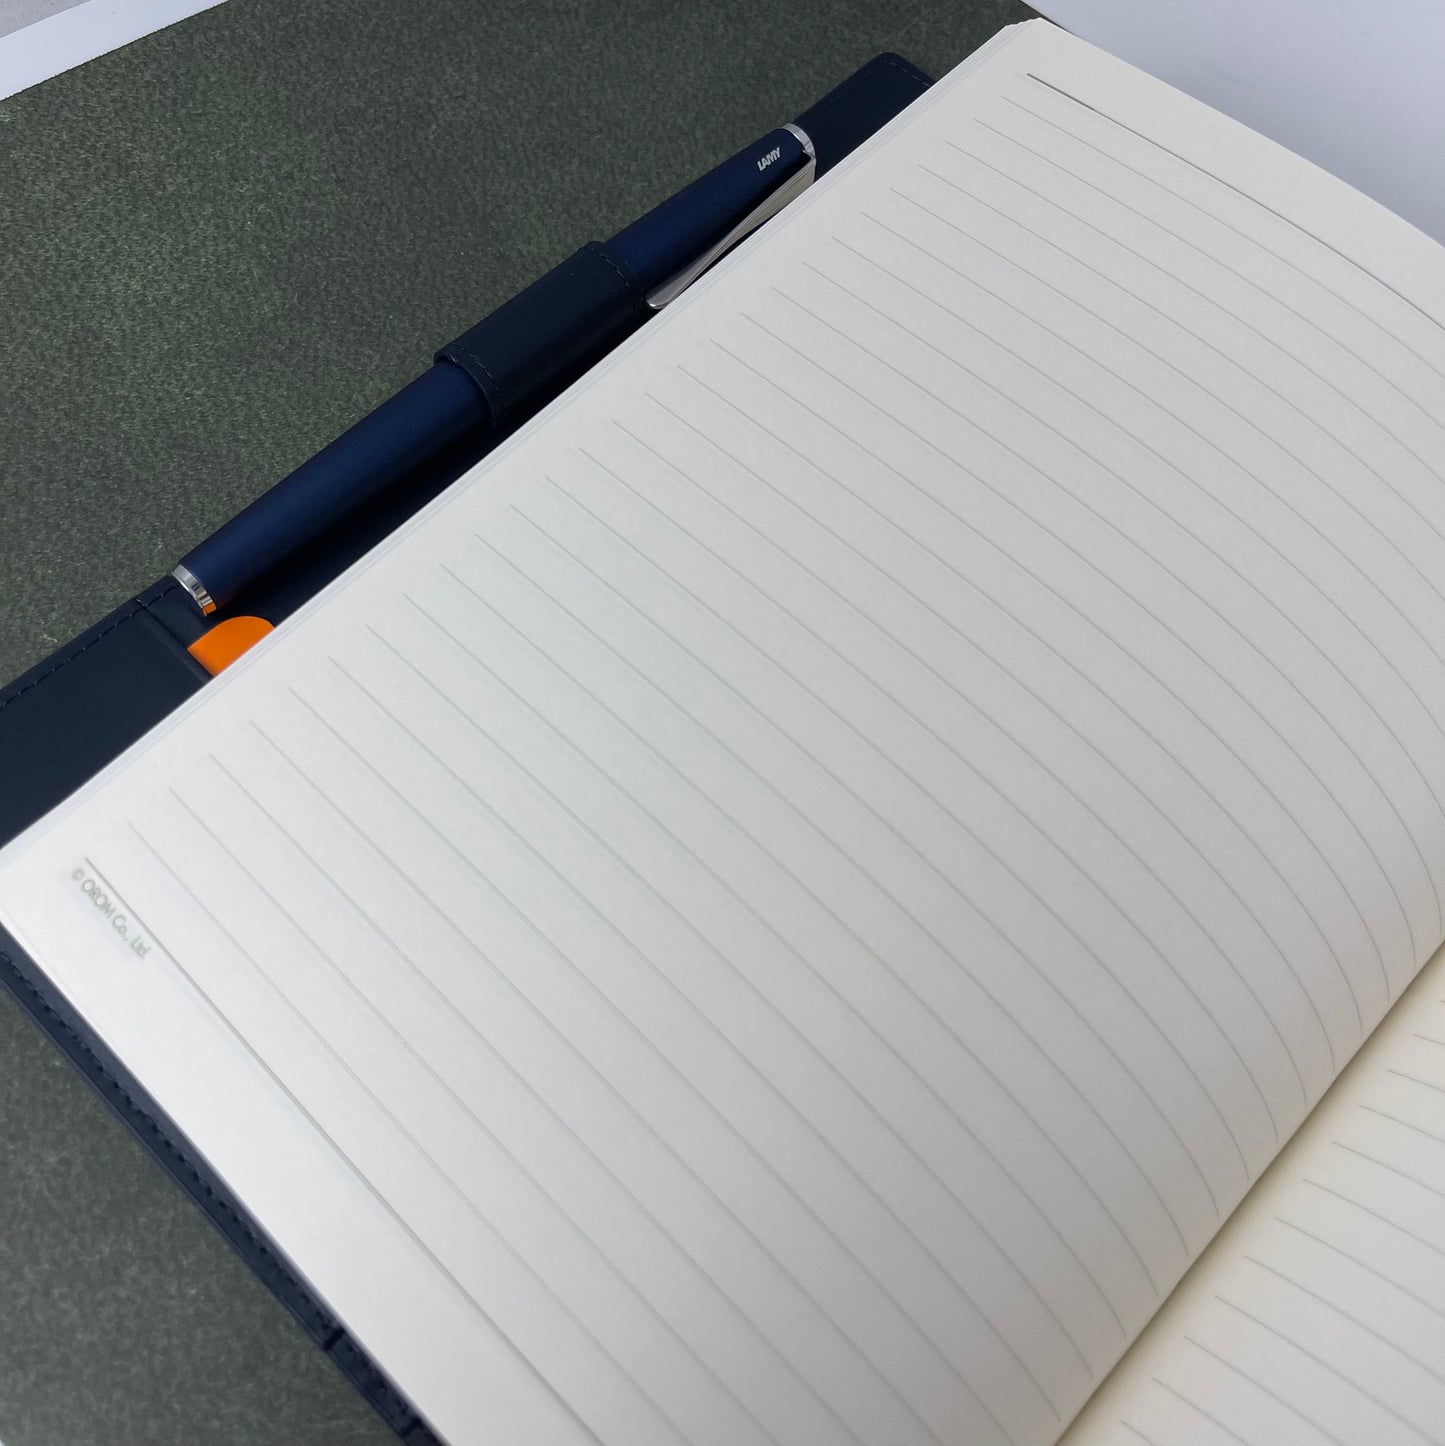 Orom Leather Refillable Journal - Navy (7.25x9.25)